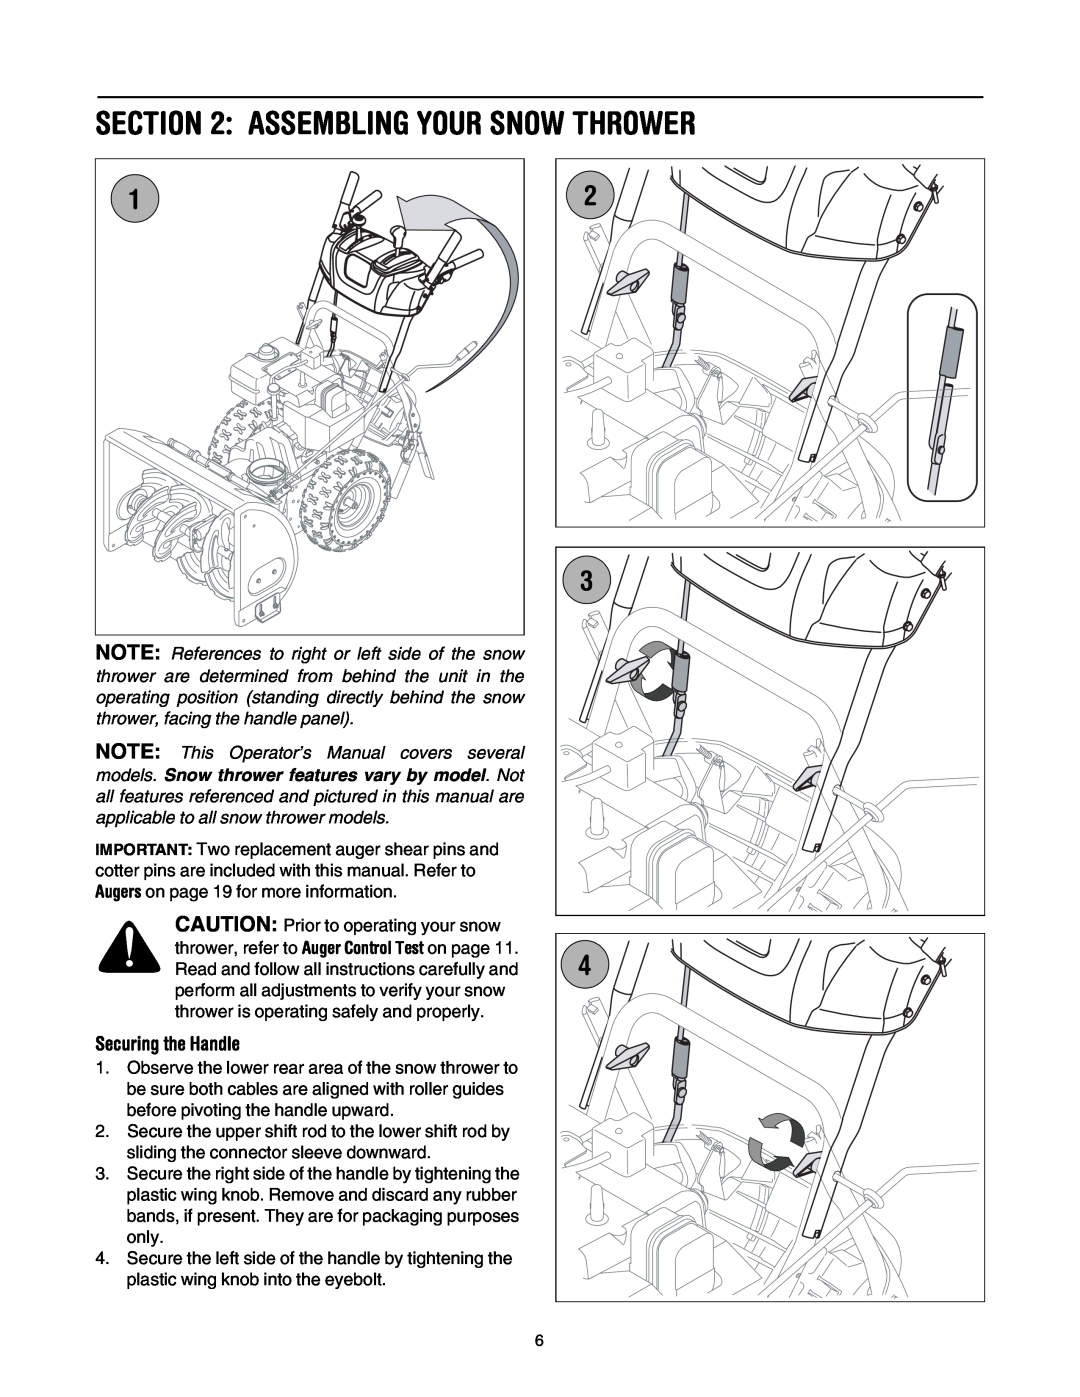 MTD L-Style manual Assembling Your Snow Thrower, Securing the Handle 